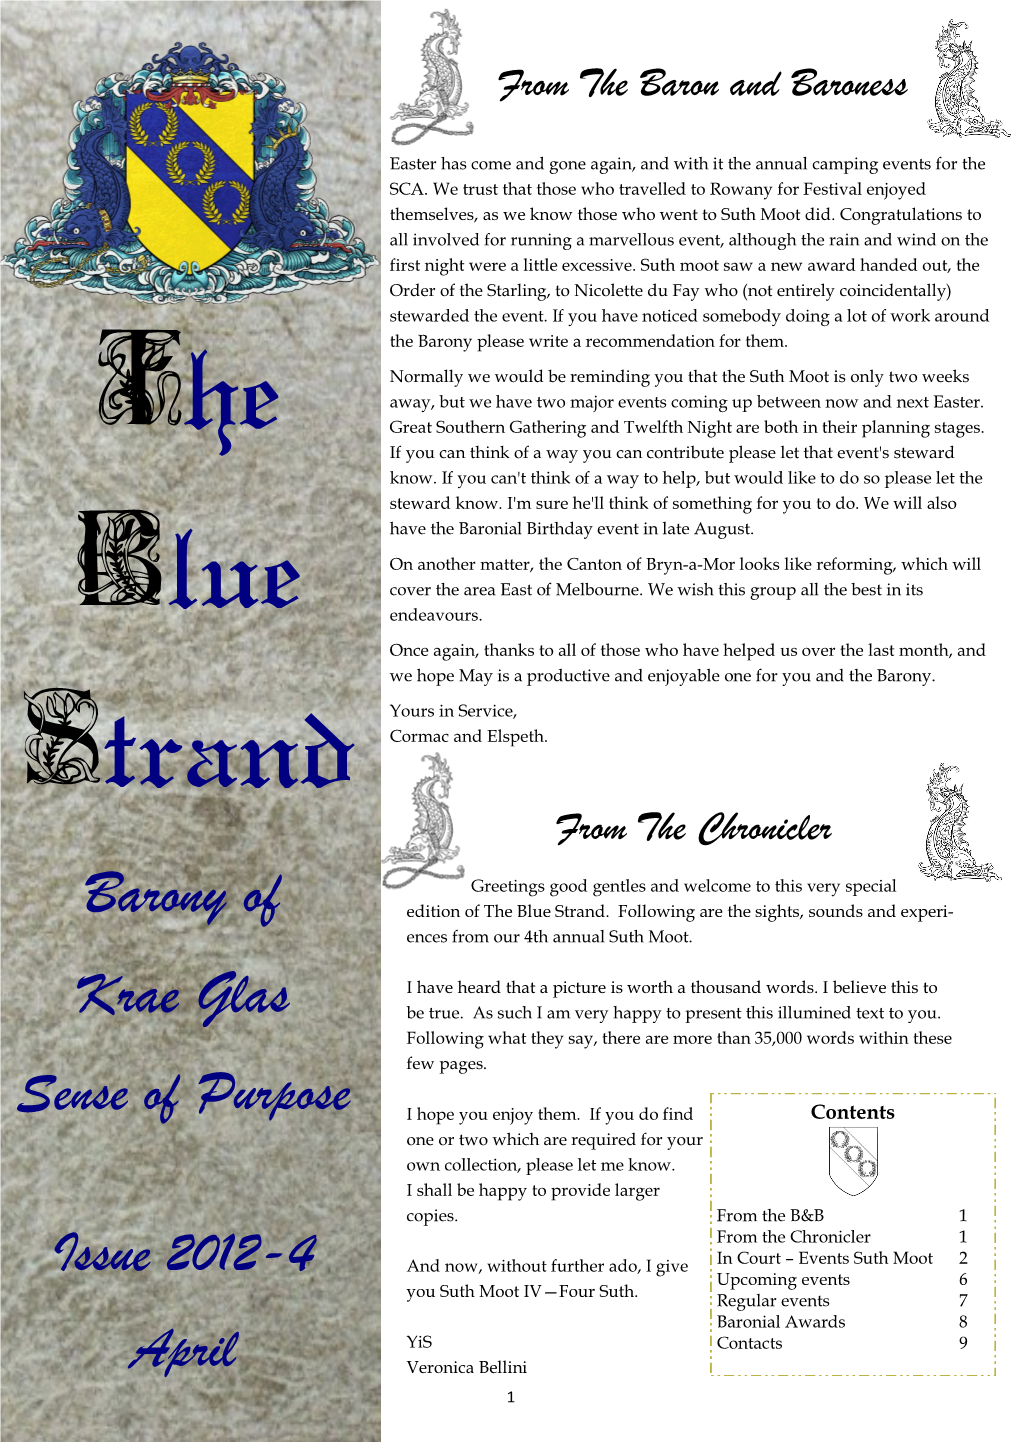 Issue 2012-4 April Barony of Krae